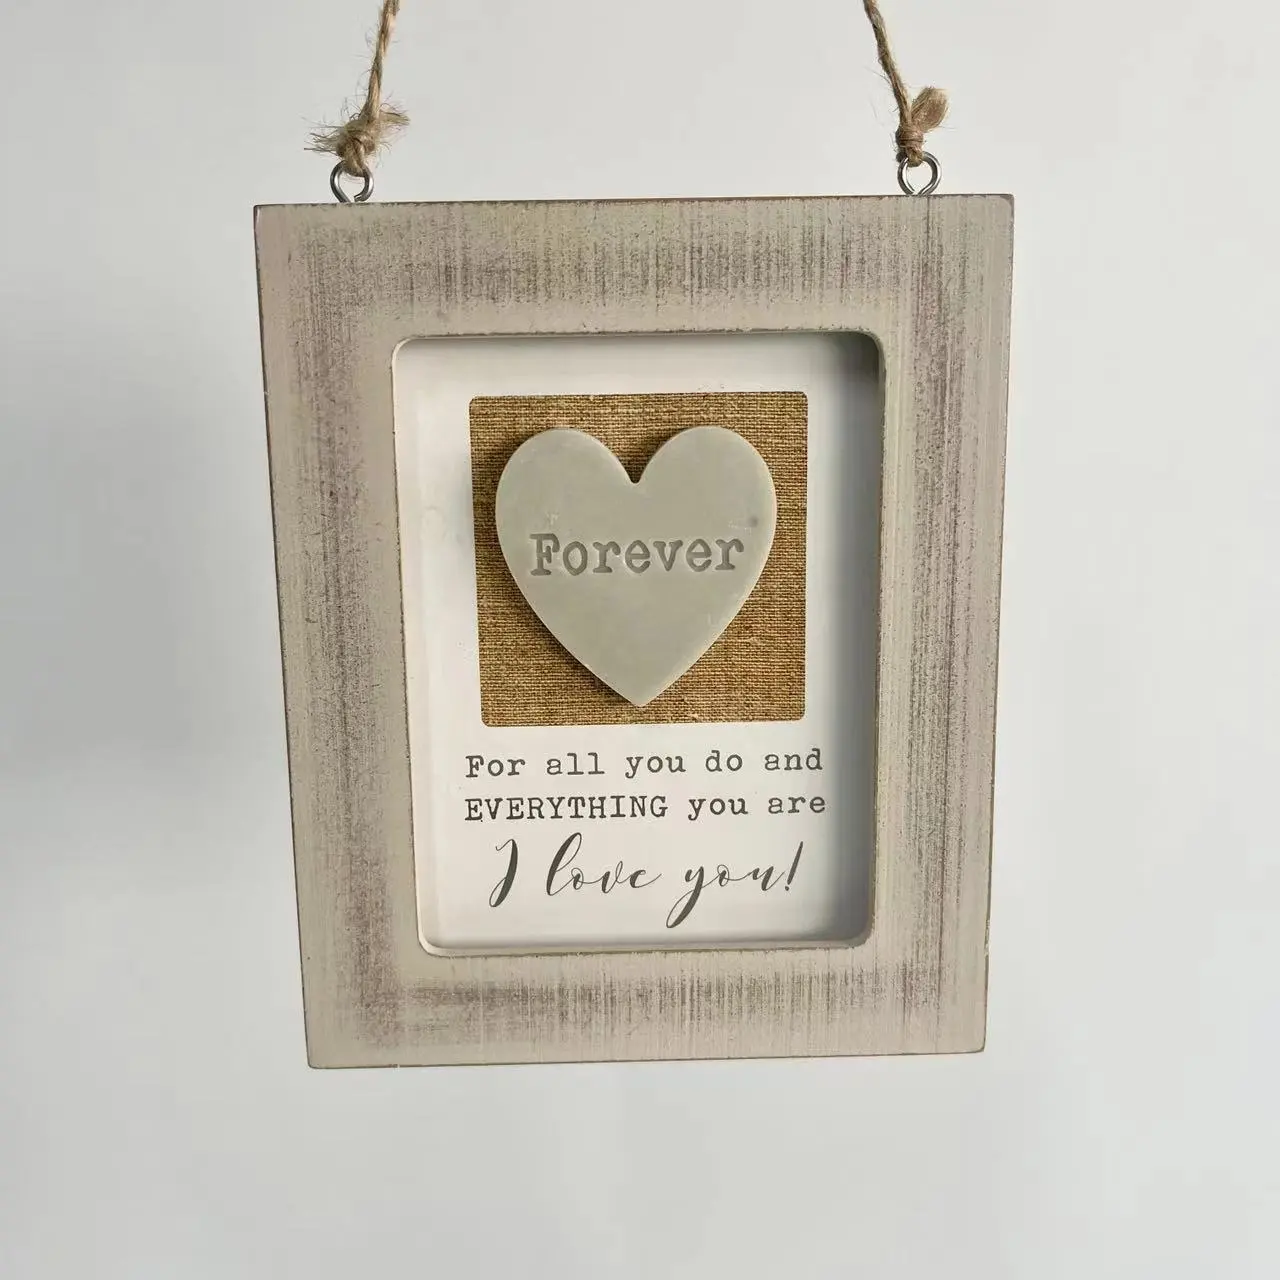 Forever Love Frame with Saying Home Decoration Plaque